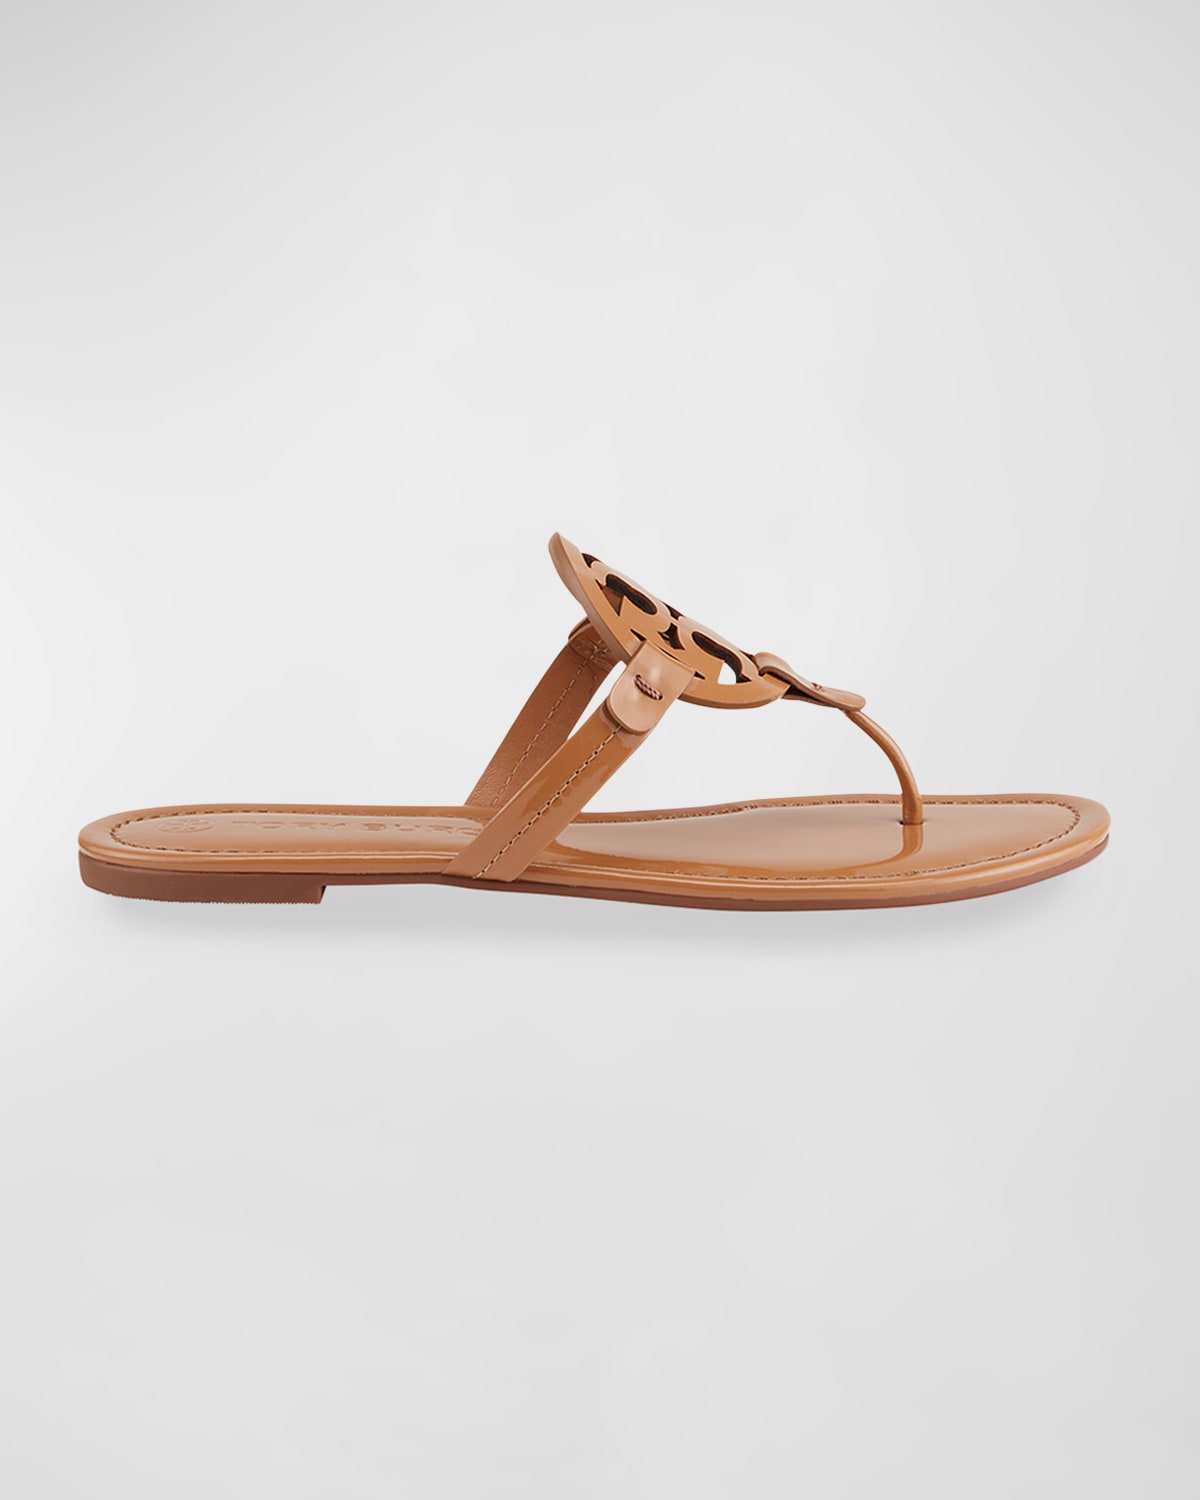 Tory Burch Miller Patent Leather Sandals In Tan | ModeSens